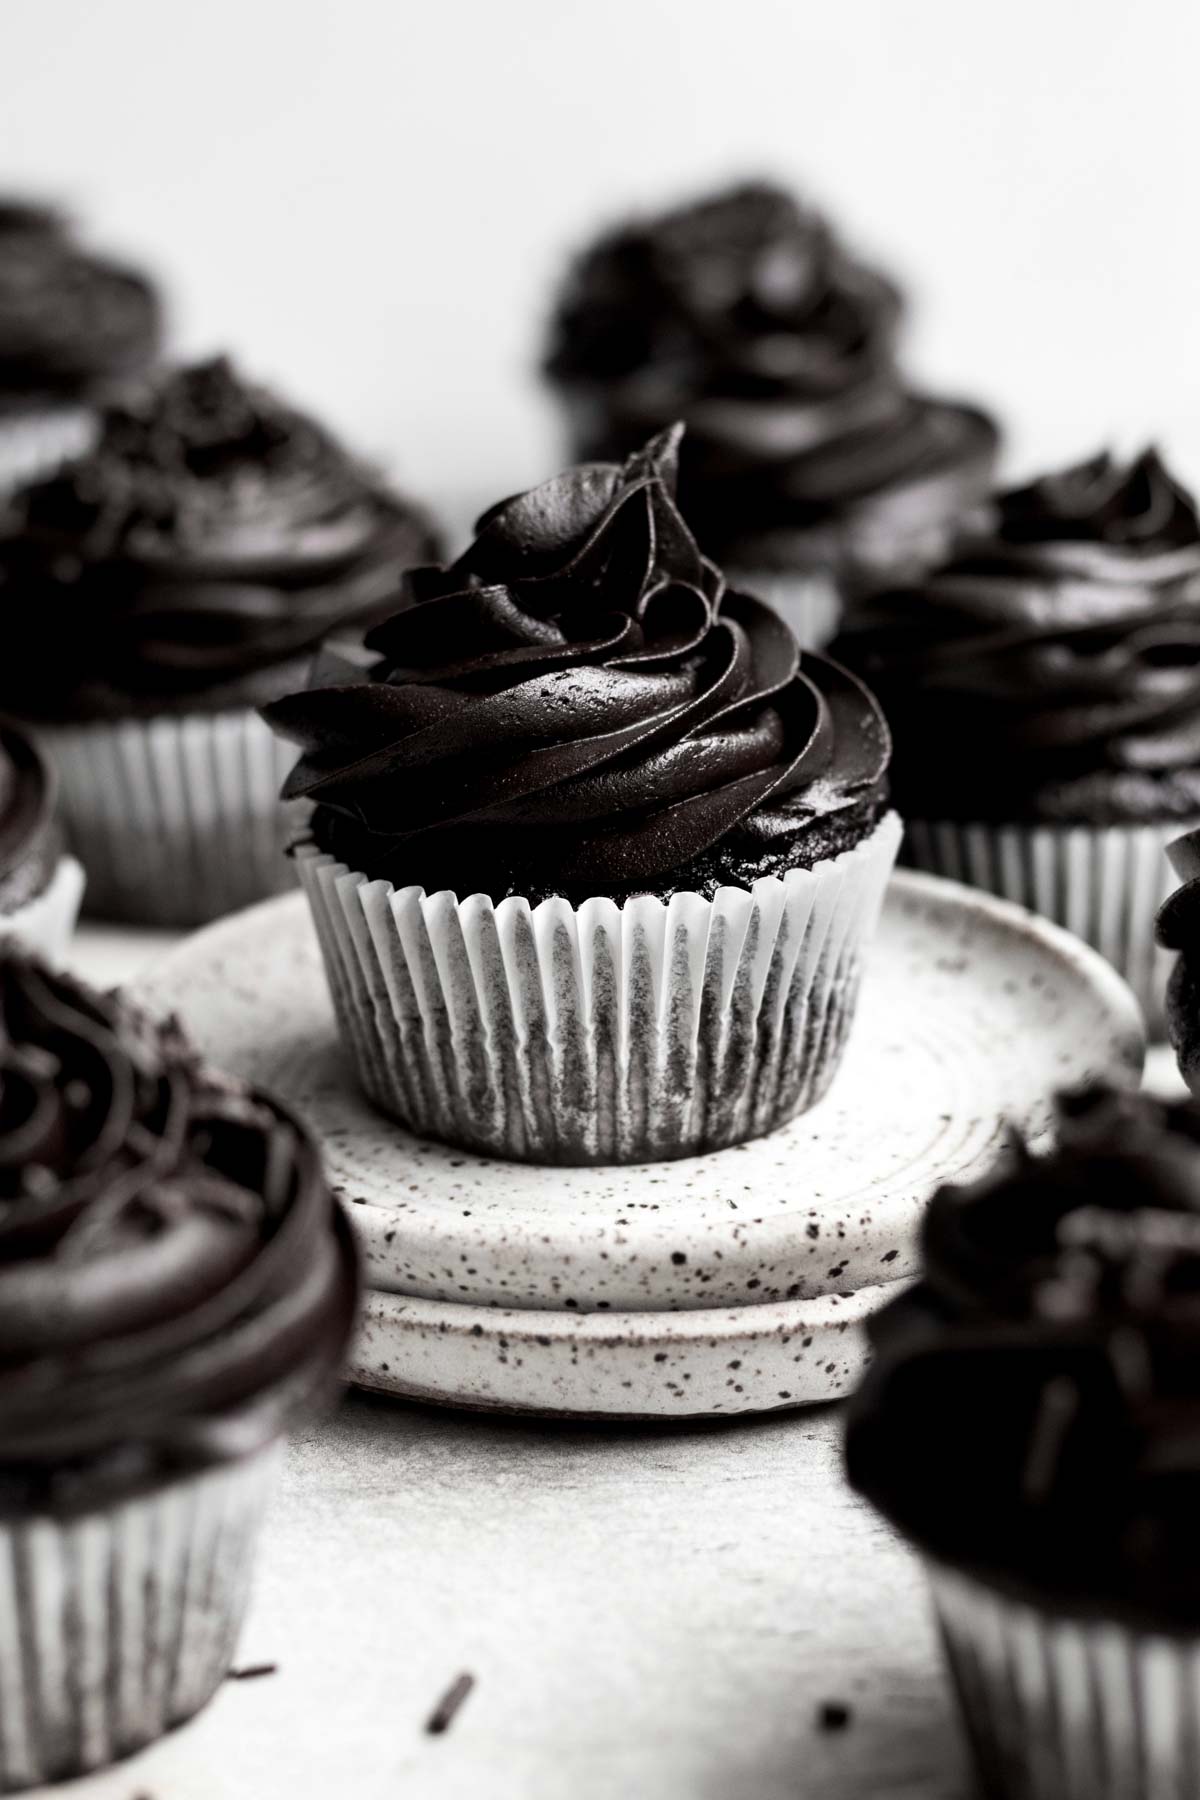 A fleet of cupcakes with swirly chocolate fudge frosting.